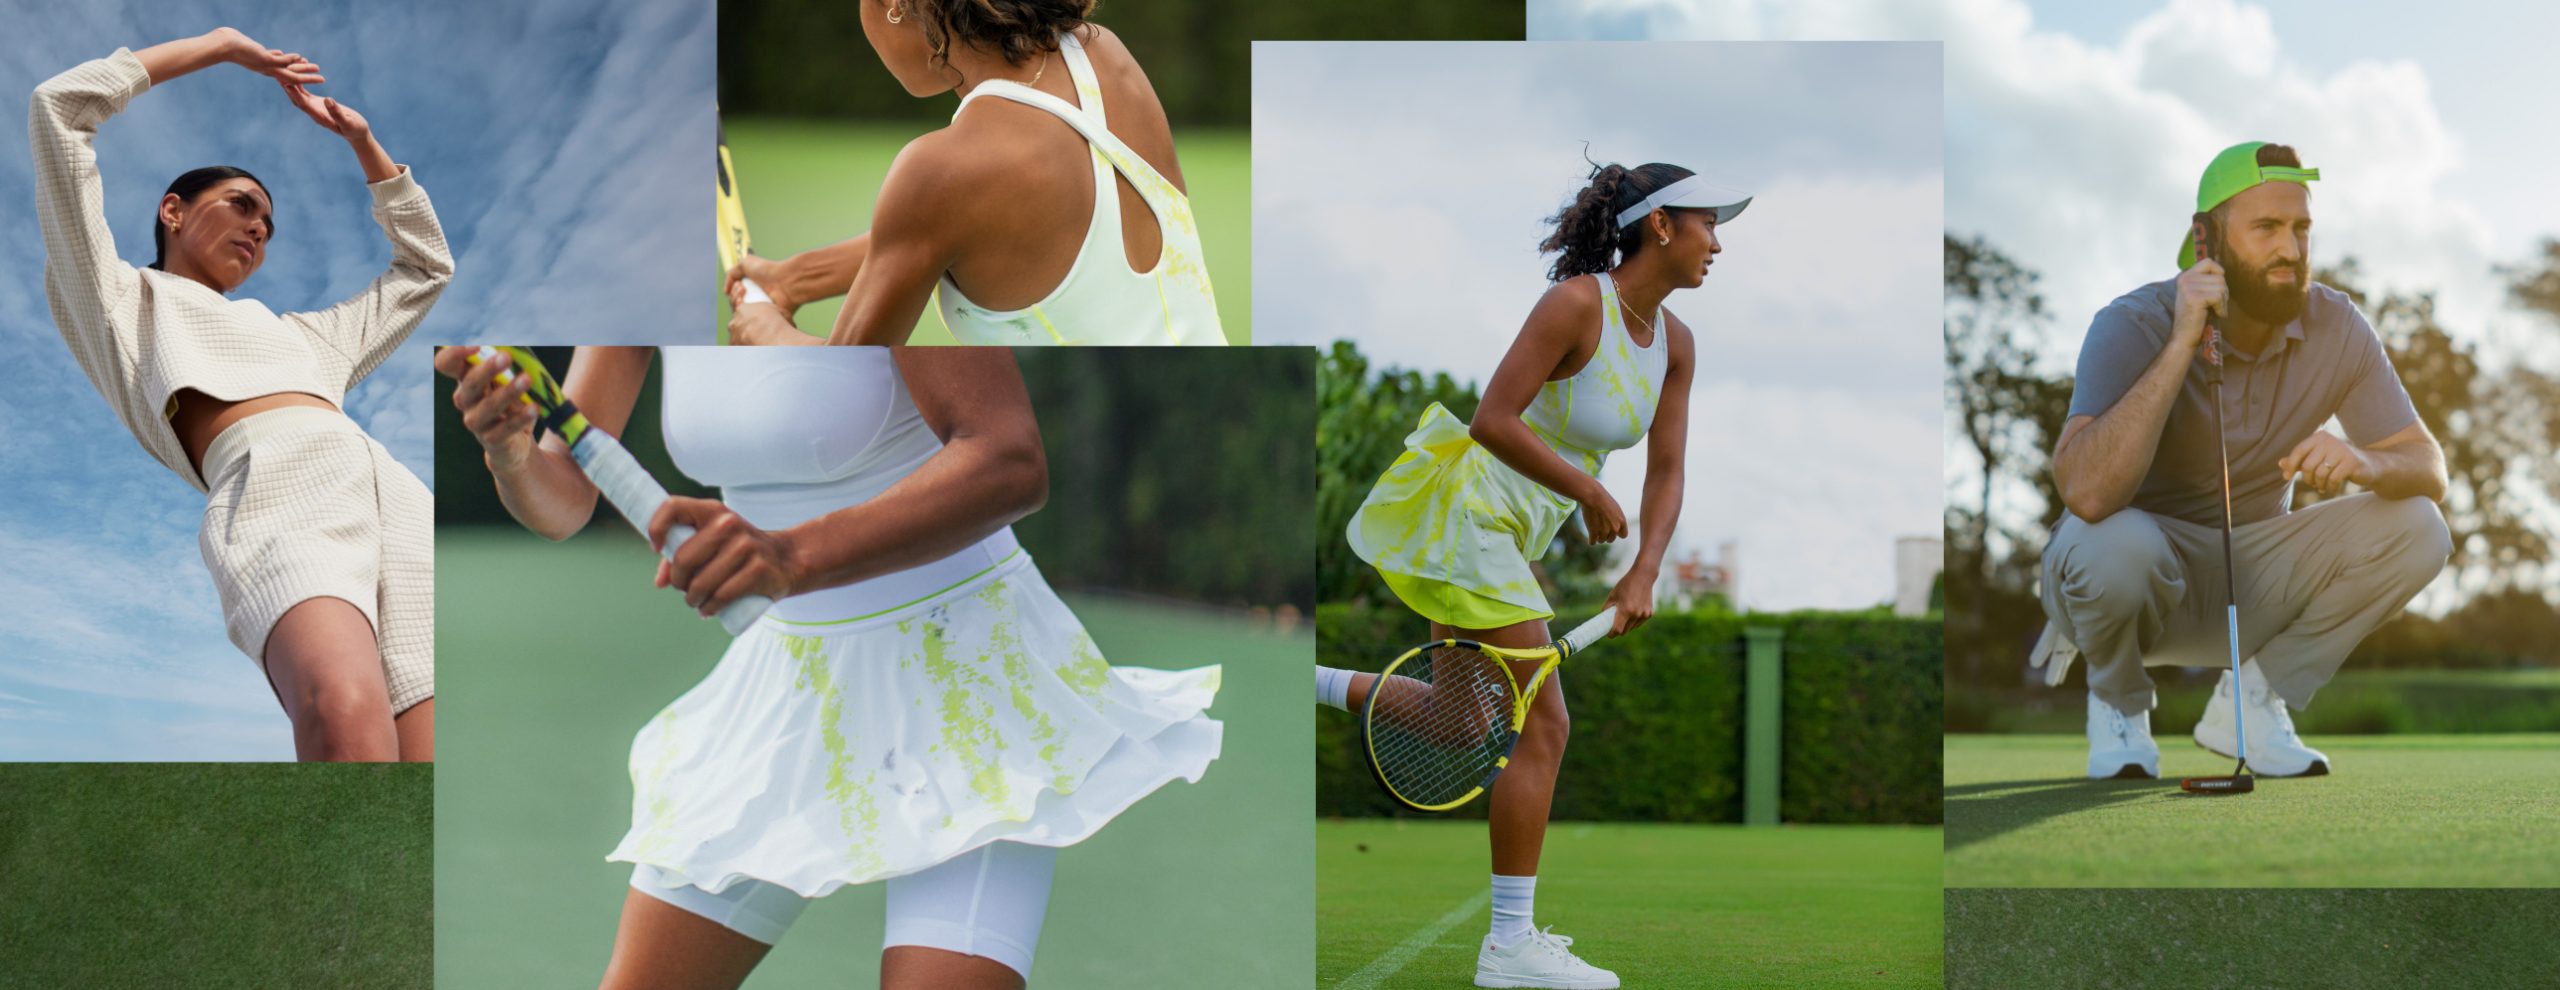 Lululemon Gears Us Up With Tennis And Golf Sportswear Collections